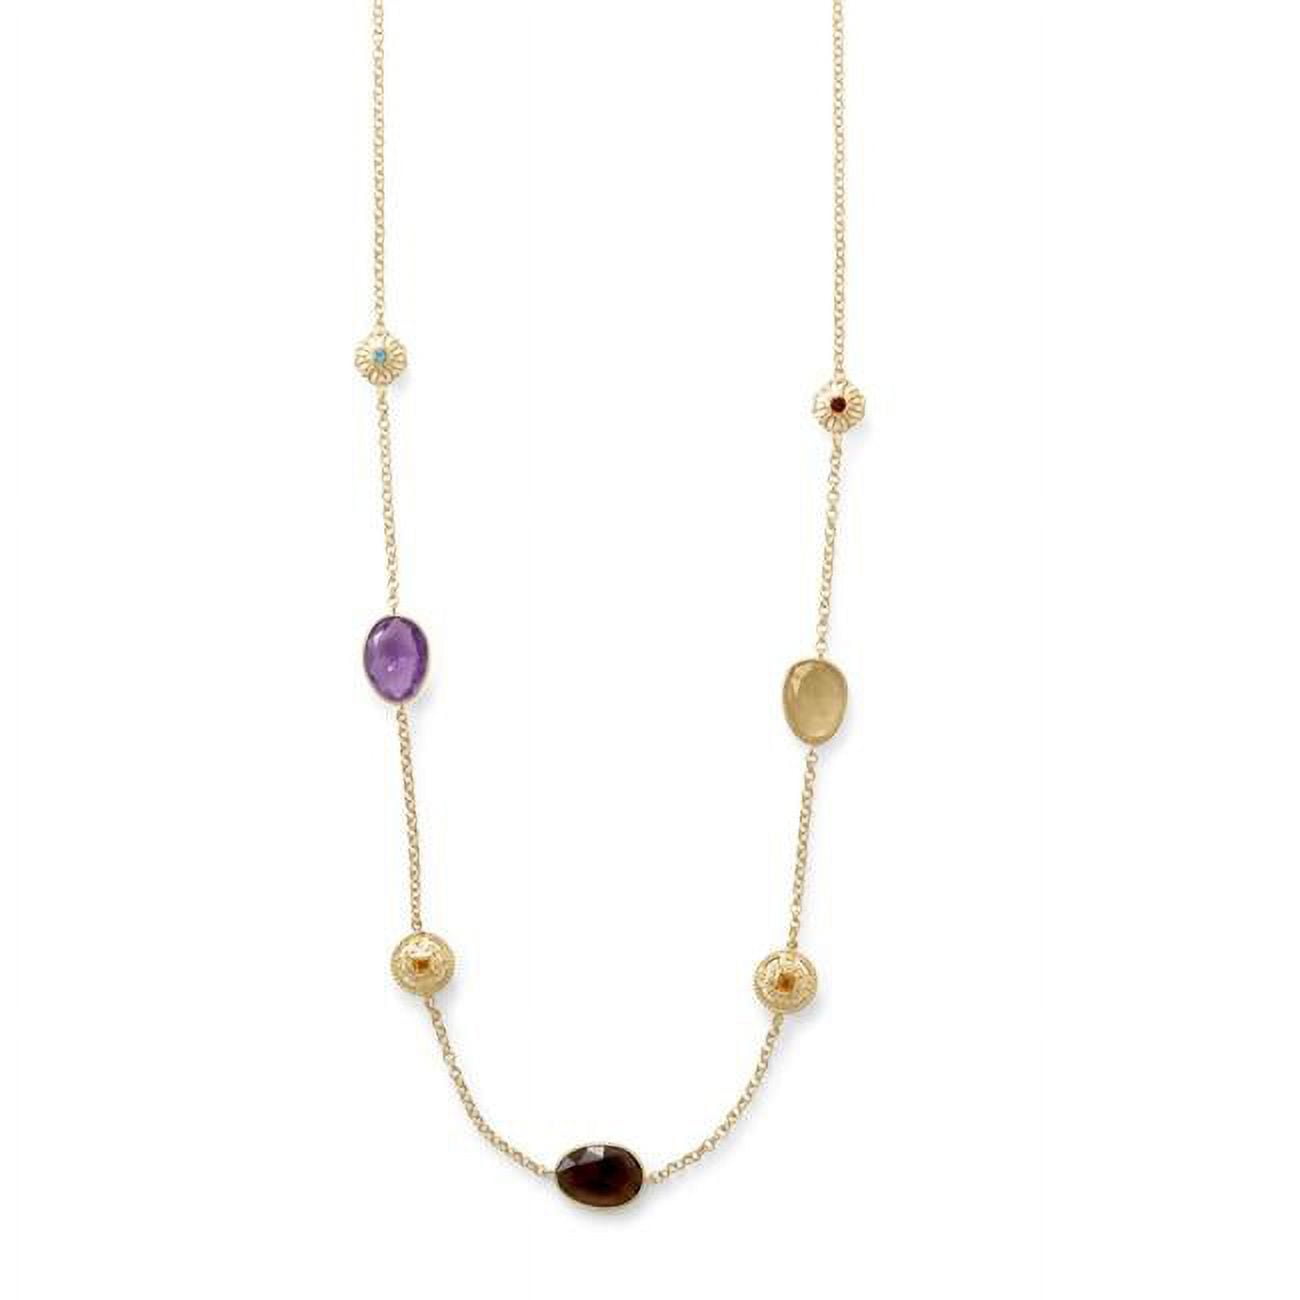 34240x 24 In. 14k Yellow Gold Plated Sterling Silver Multi Gemstone Necklace